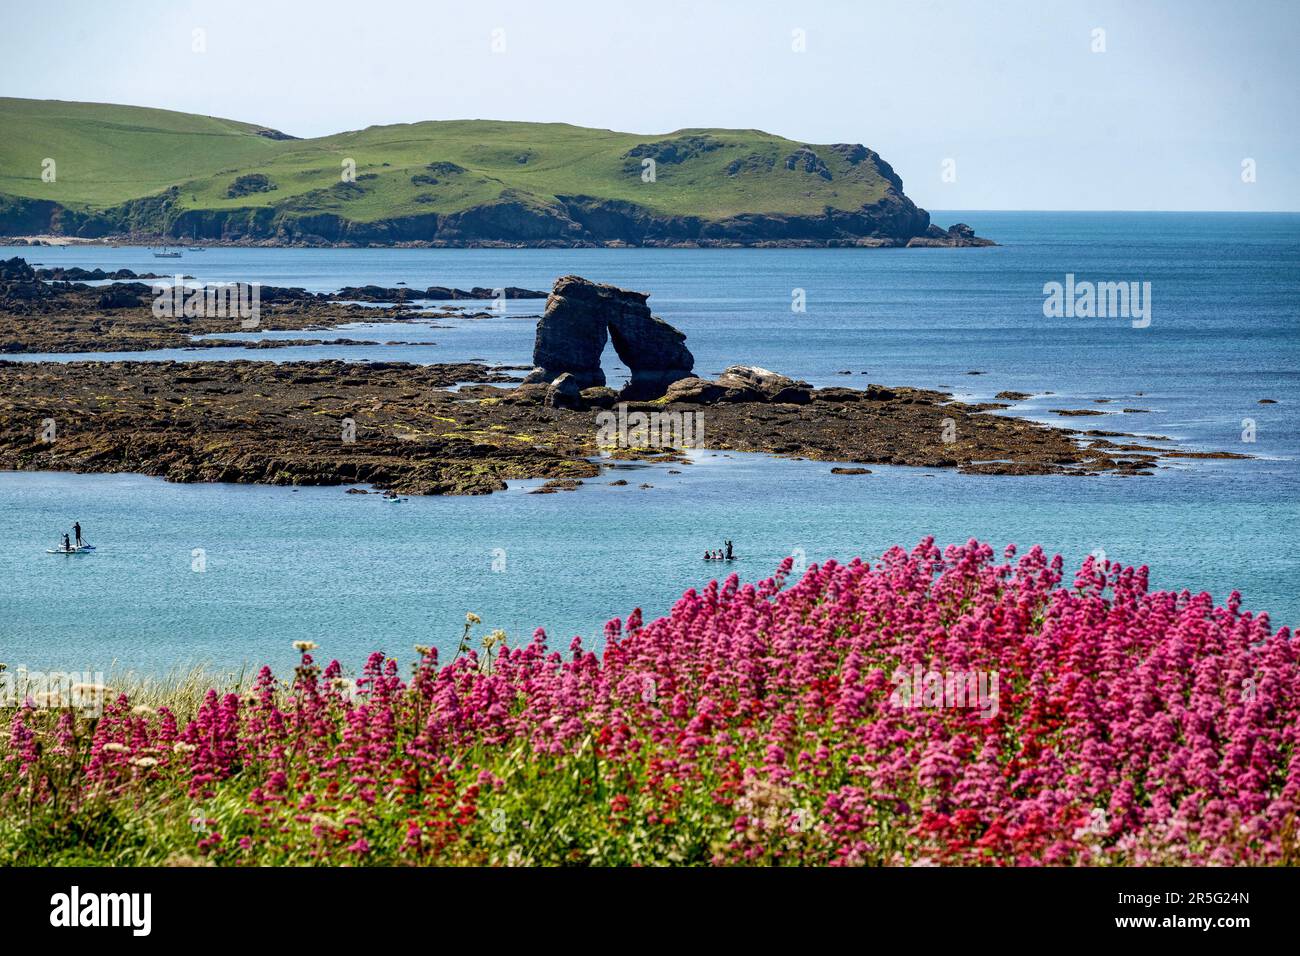 03.06.23. DEVON WEATHER. People make the most of the warm weather in front of Thurlestone Rock at South Milton Sands in South Devon today as temperatu Stock Photo